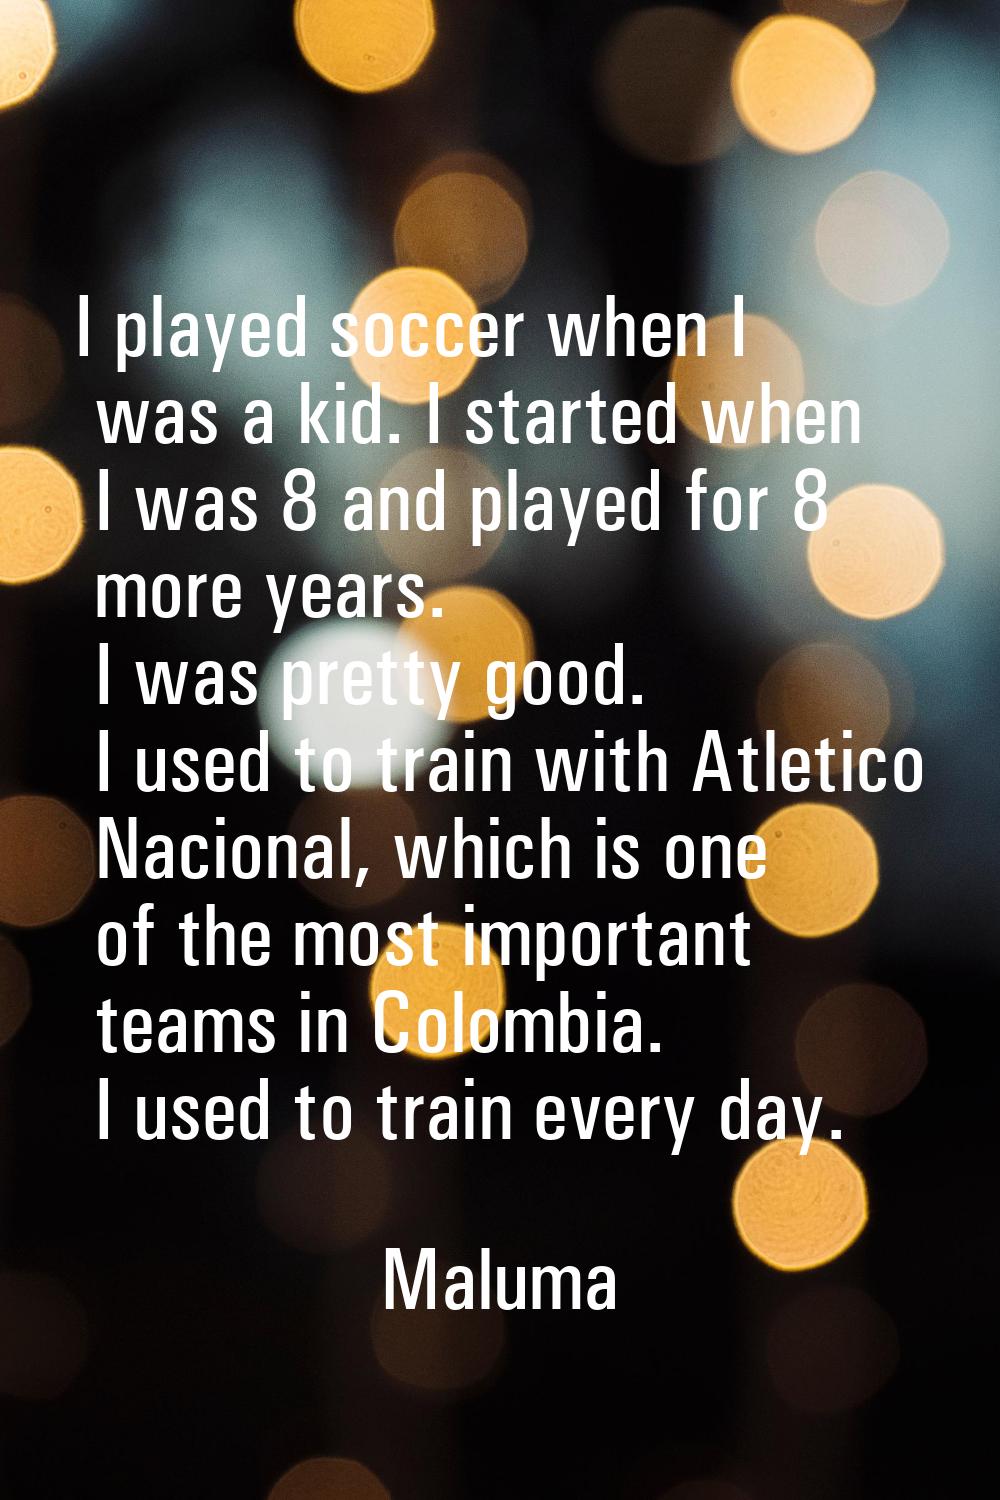 I played soccer when I was a kid. I started when I was 8 and played for 8 more years. I was pretty 